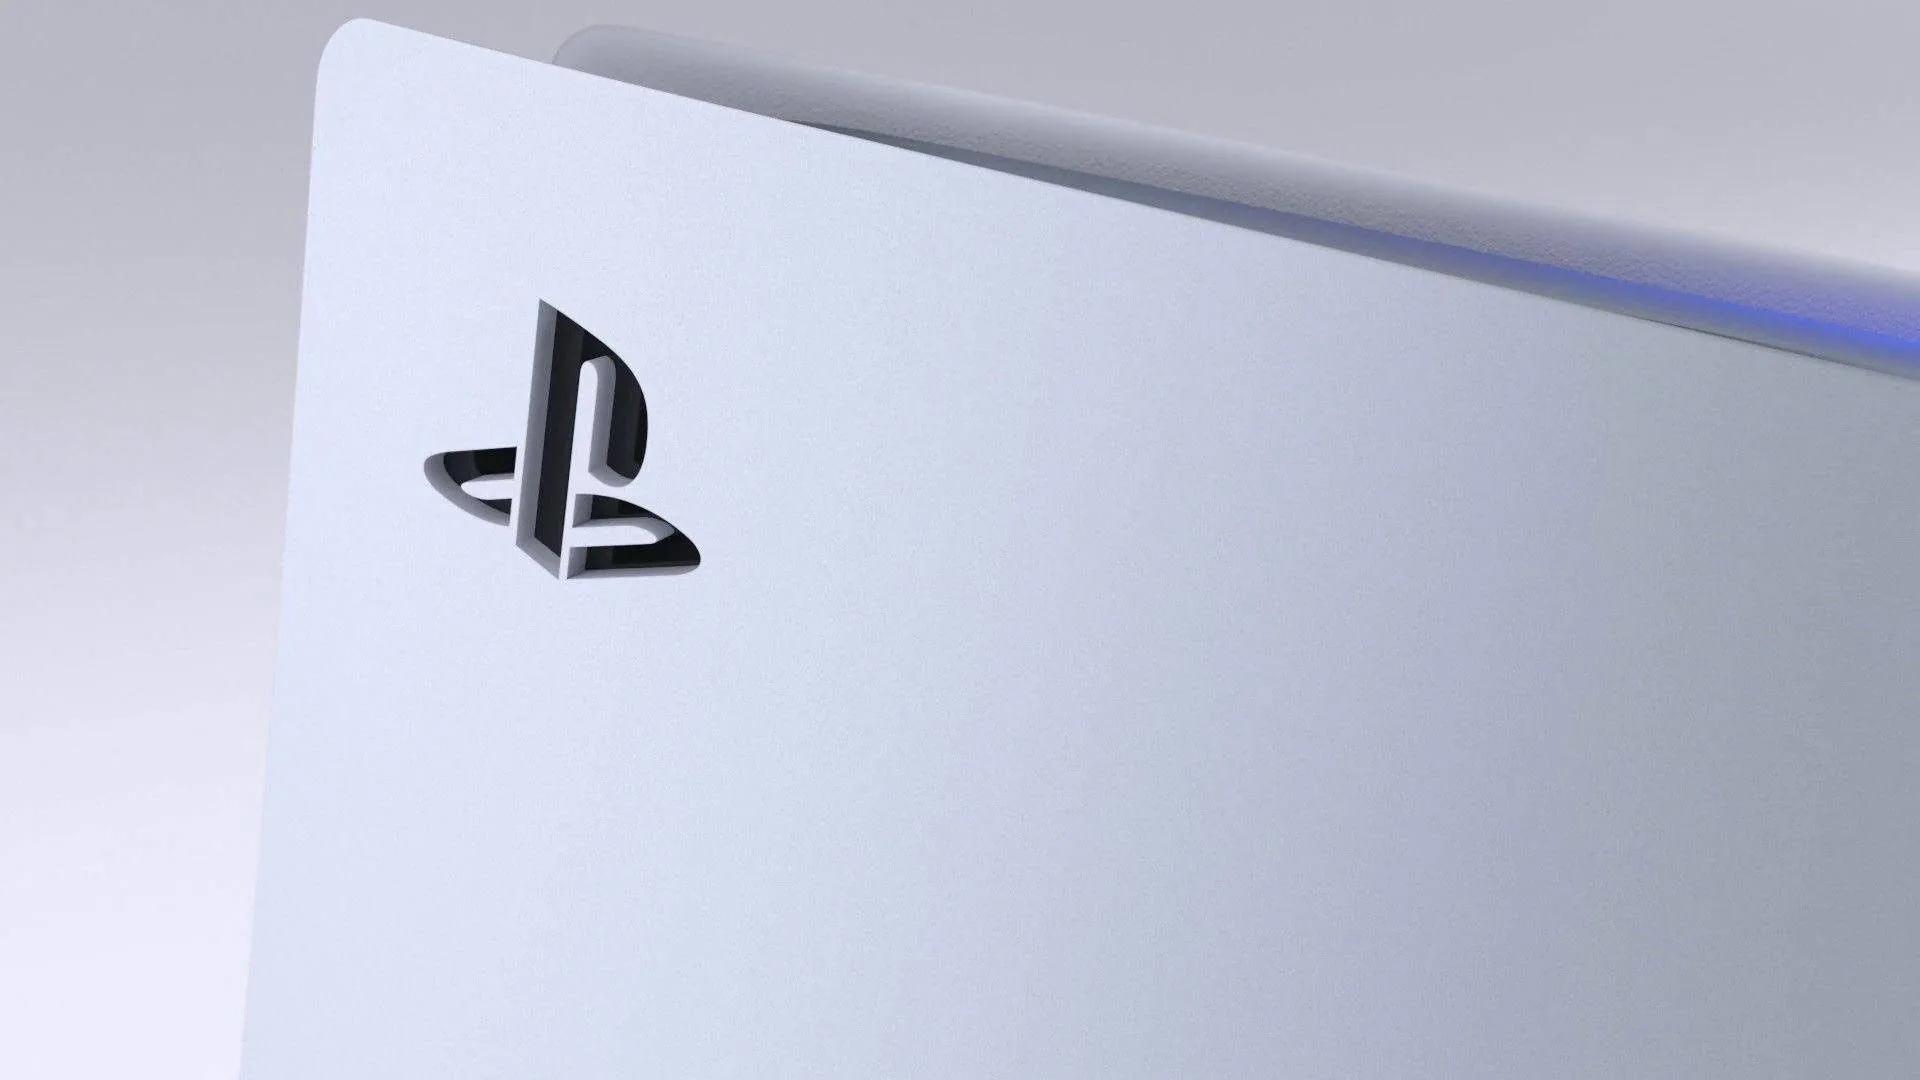 PS5 Pro, the technical specifications of the next Sony console revealed